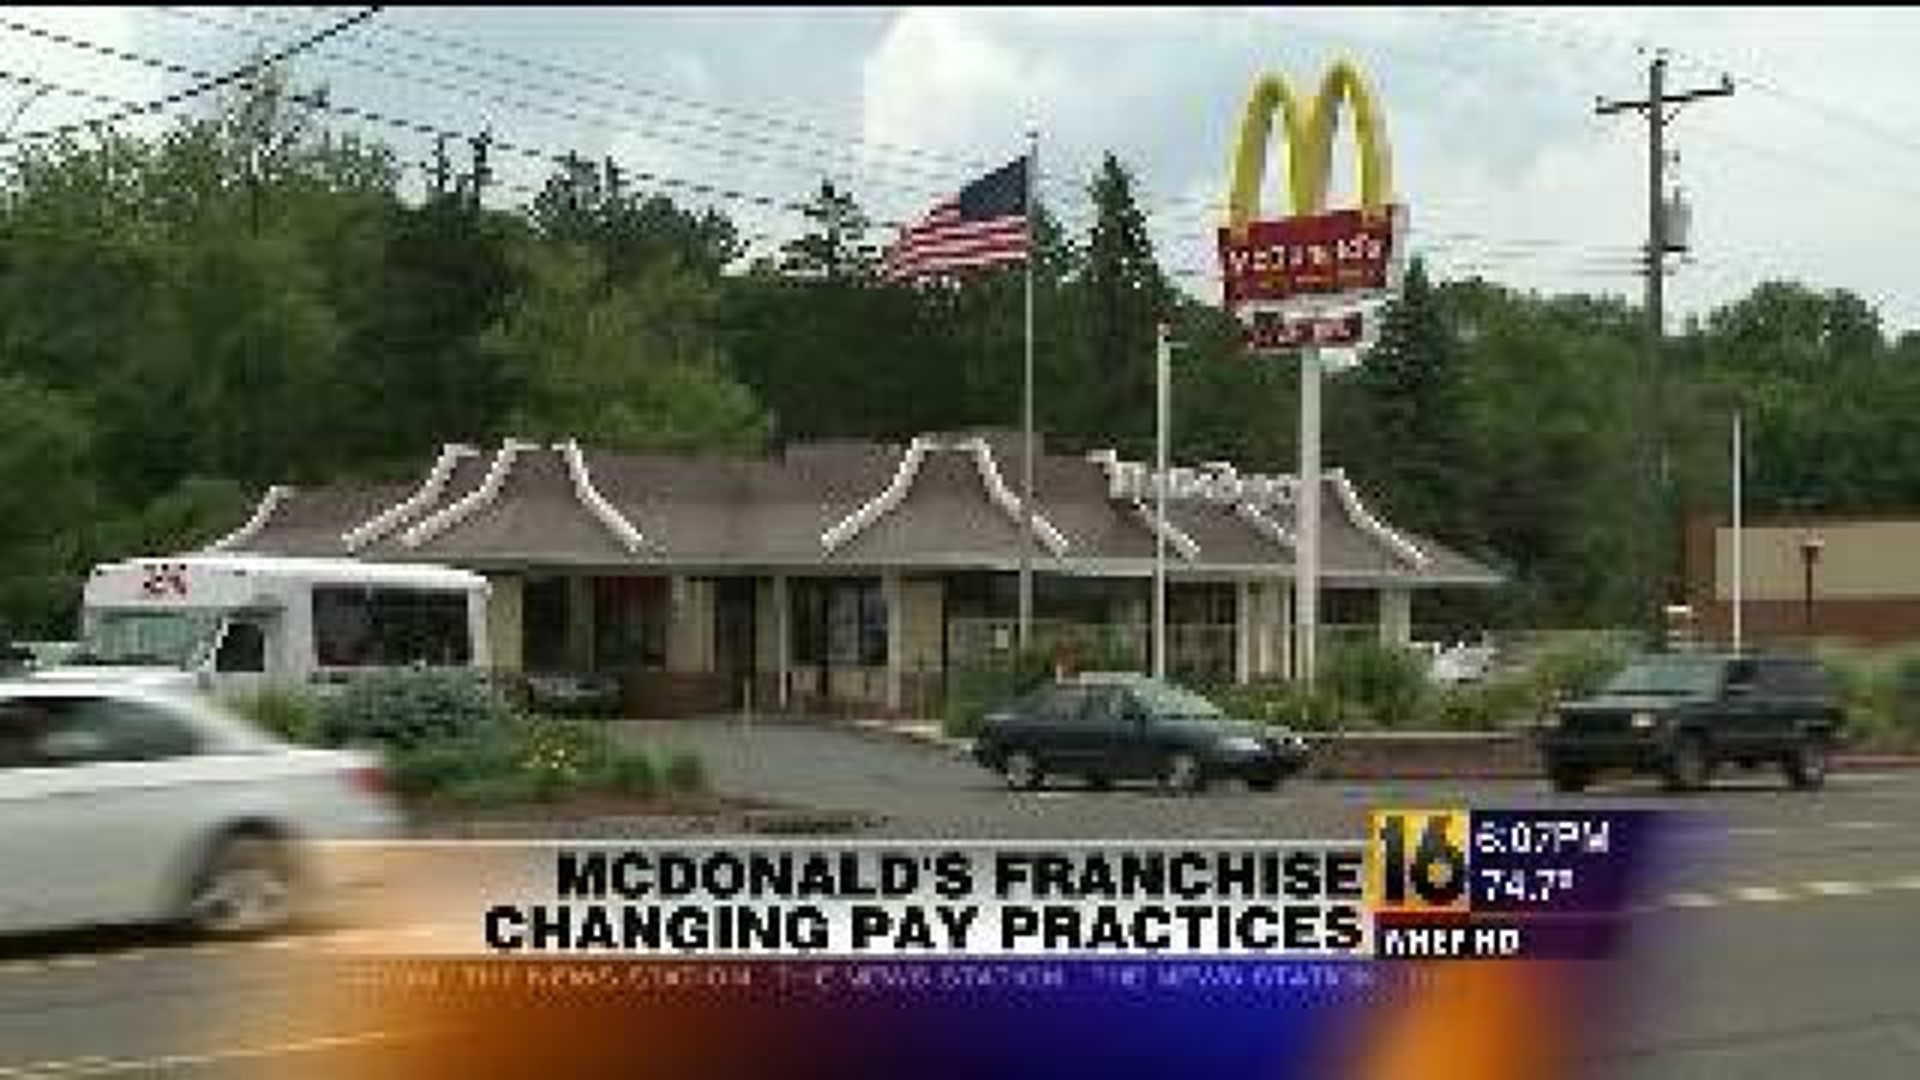 McDonald’s Franchise Changing Pay Practices